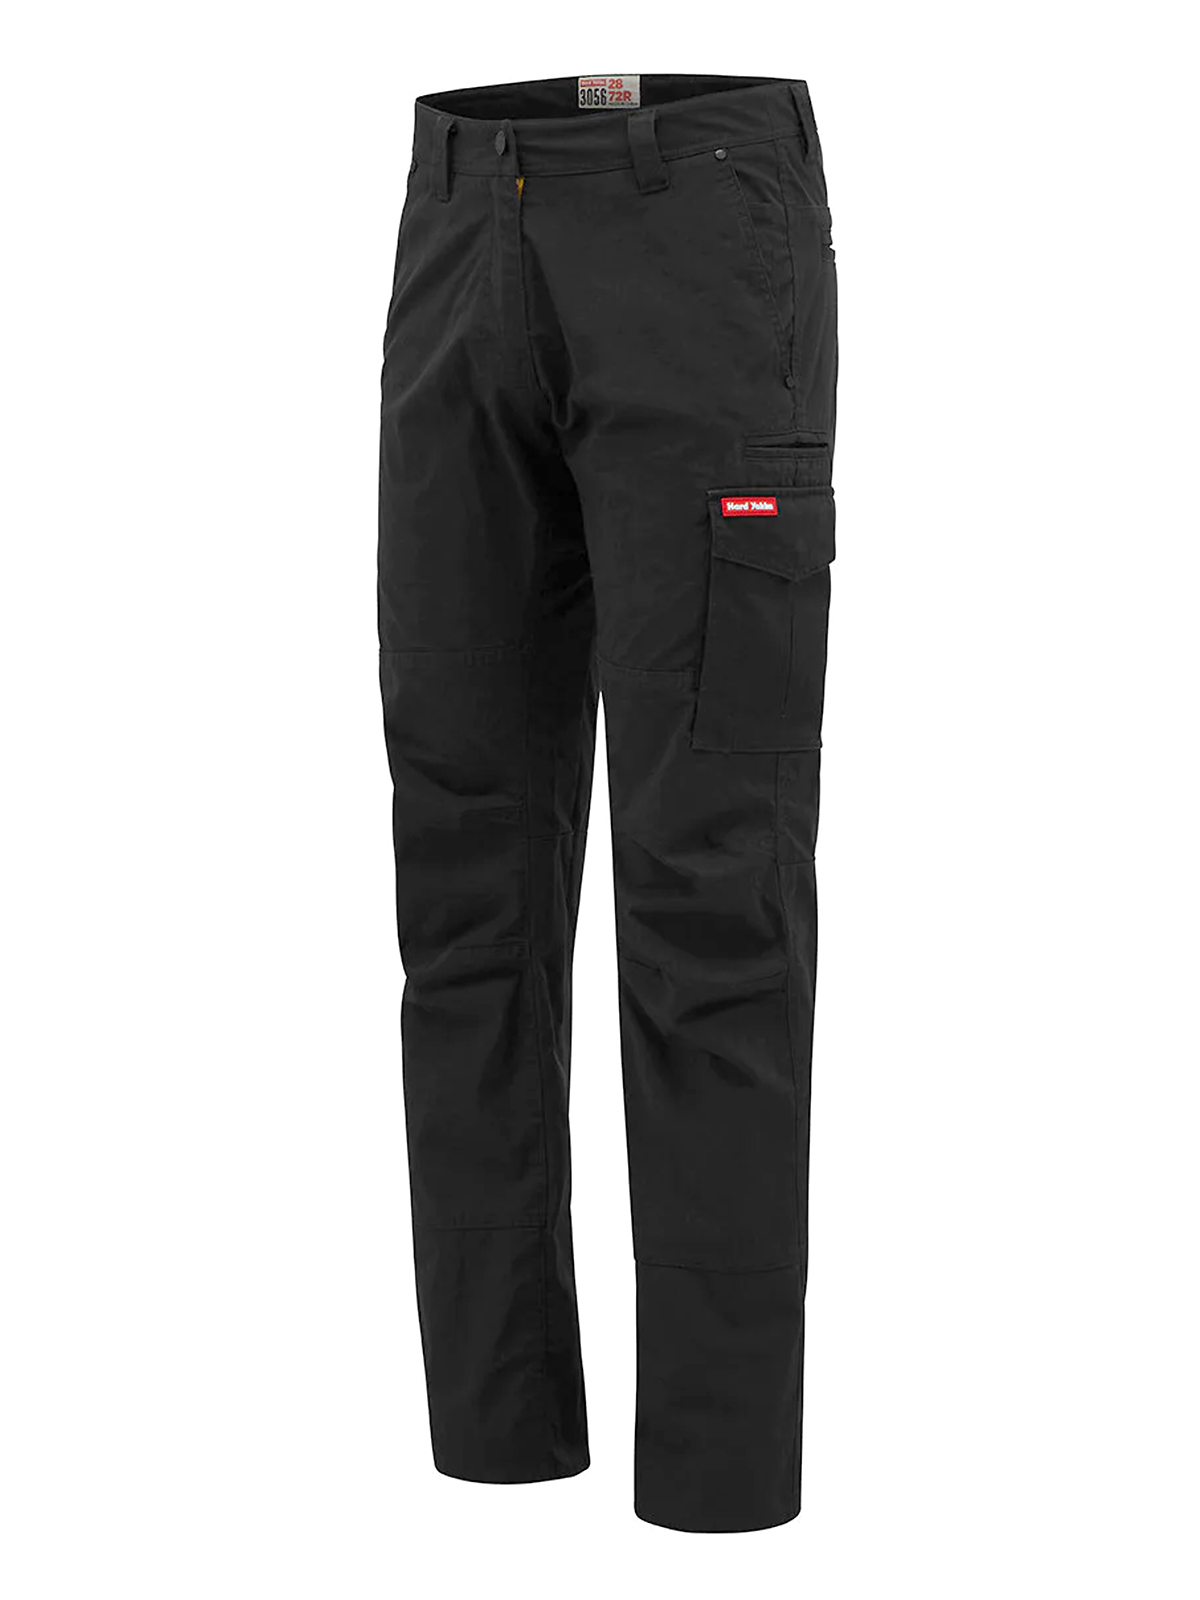 Funct. cargo trousers e.s.dynashield solid, ladies pacific | Strauss